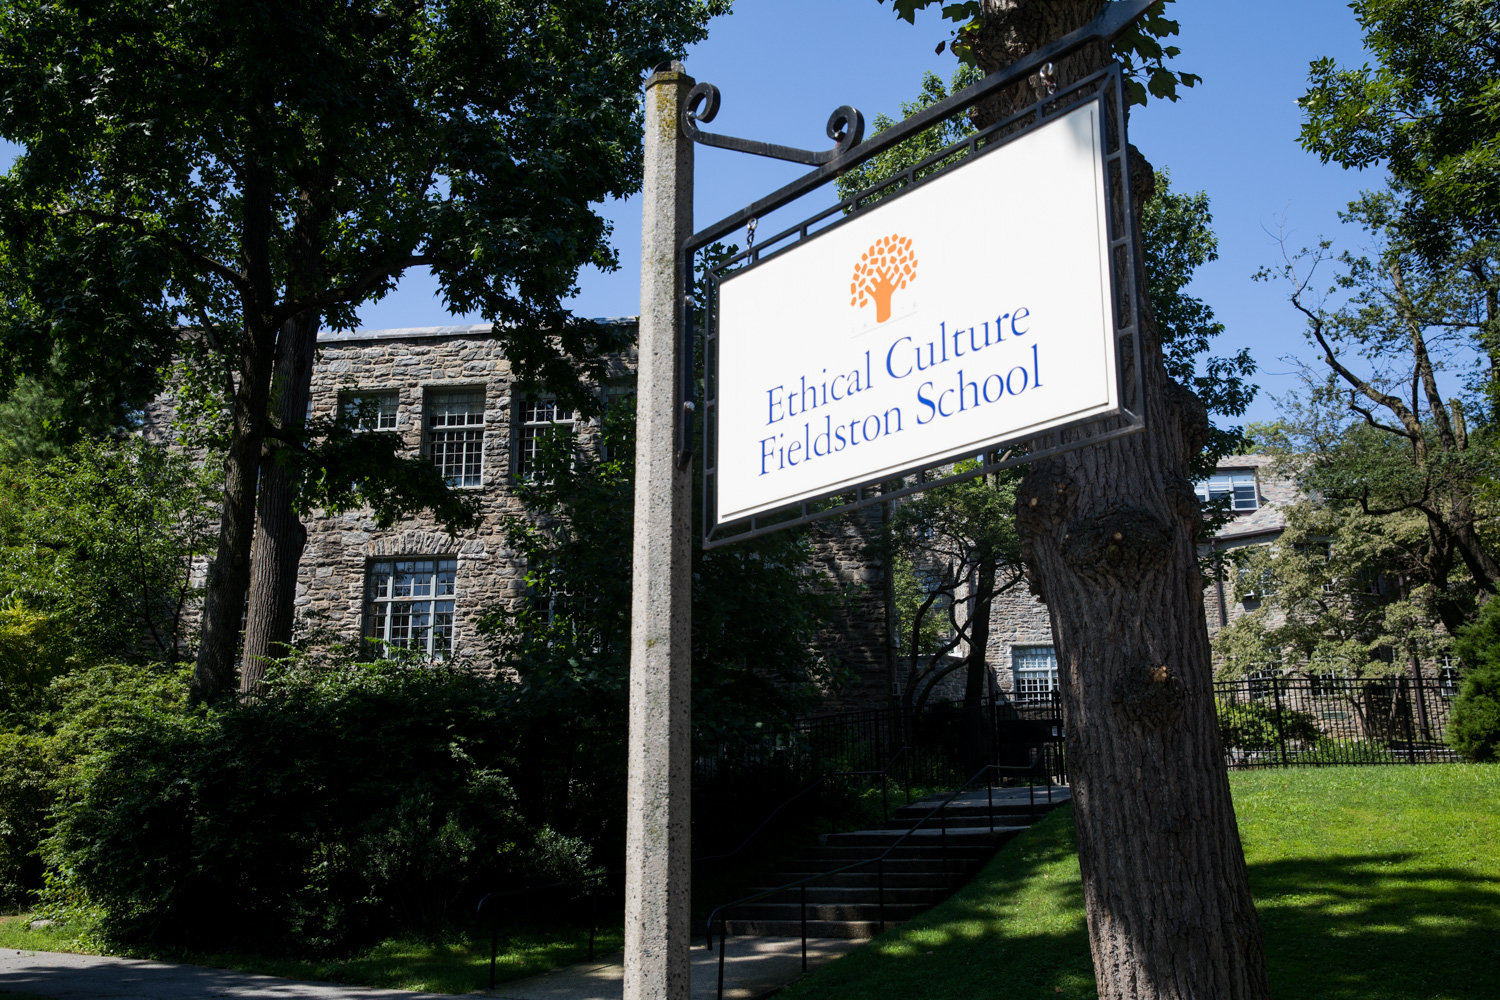 A teacher was reportedly fired from Ethical Culture Fieldston School in the fallout of a guest speaker last year accused of making anti-Semitic remarks.